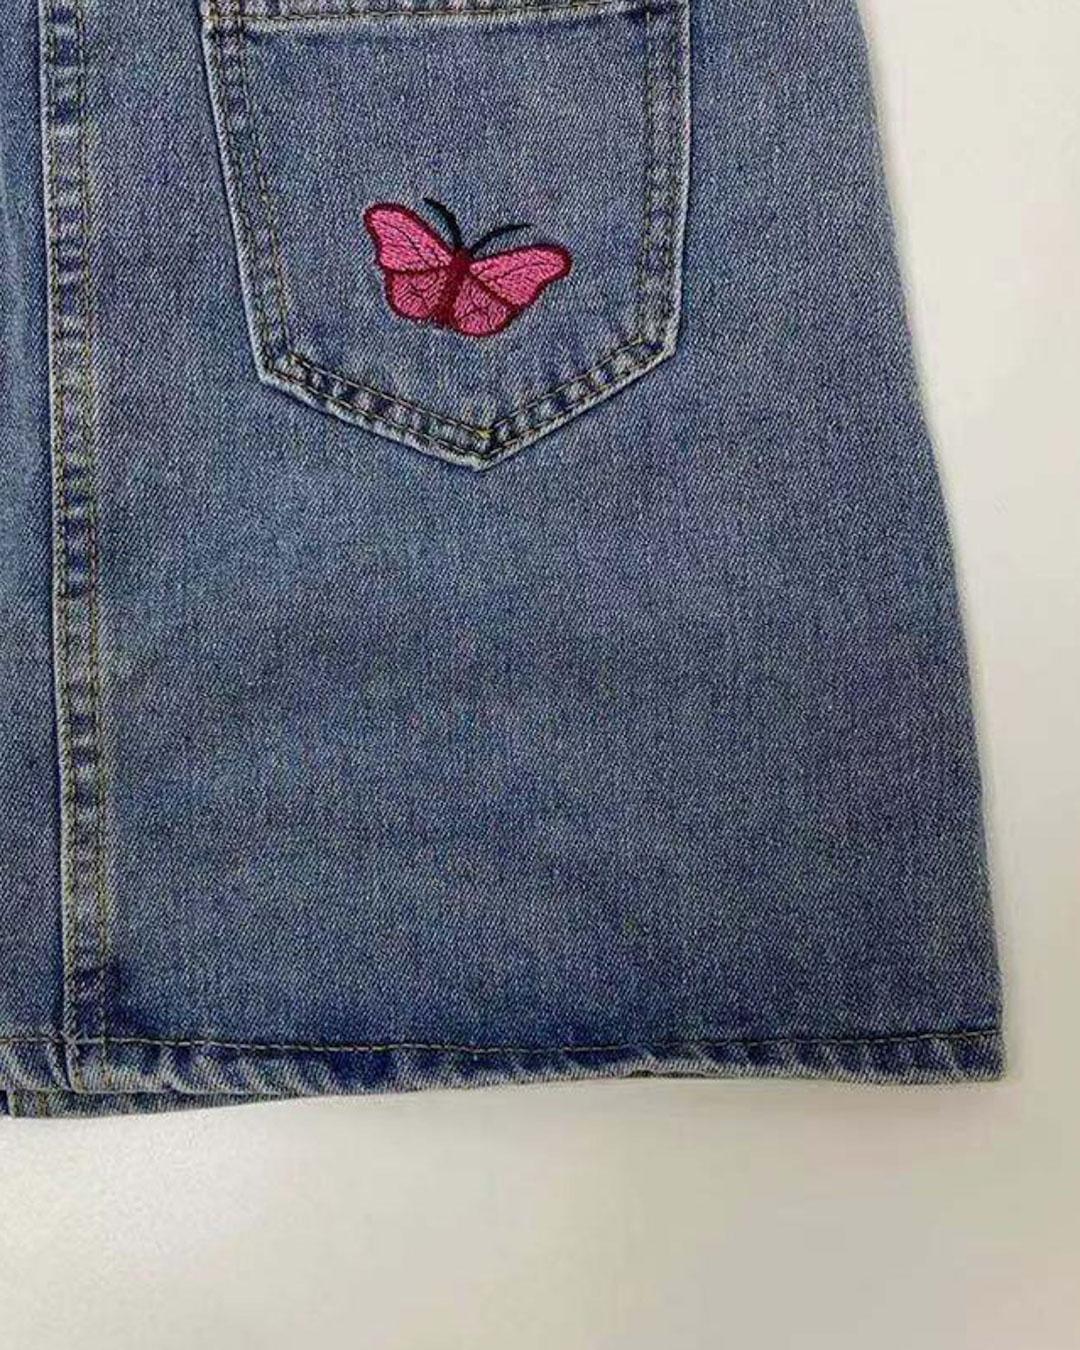 Ins Butterfly Embroidery Lace Stitching Denim Skirt